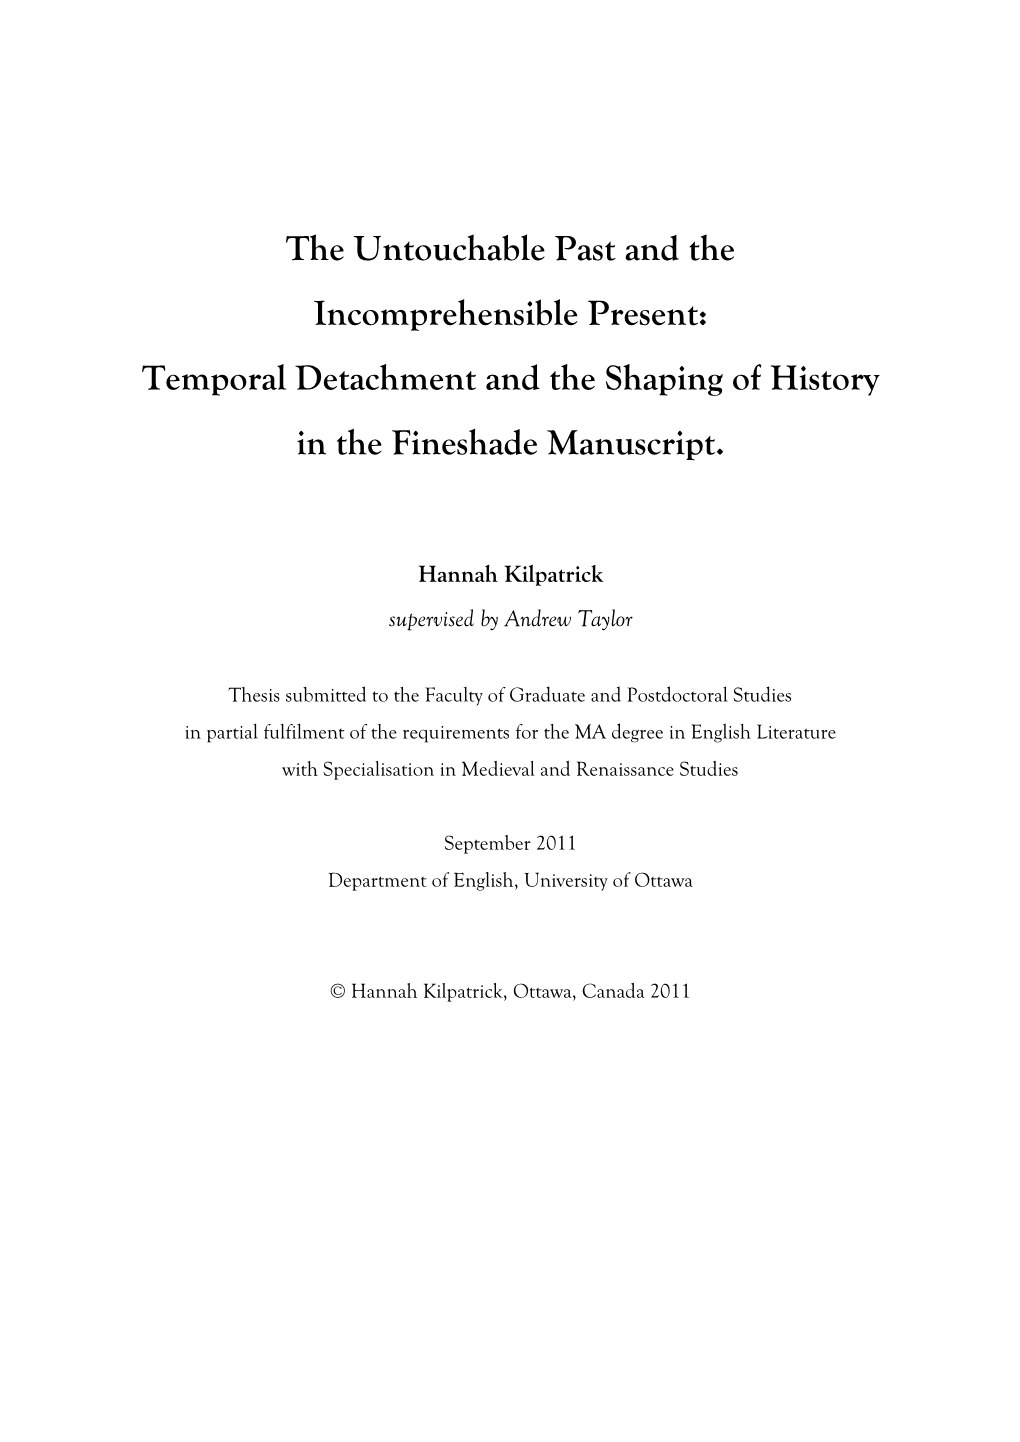 Temporal Detachment and the Shaping of History in the Fineshade Manuscript